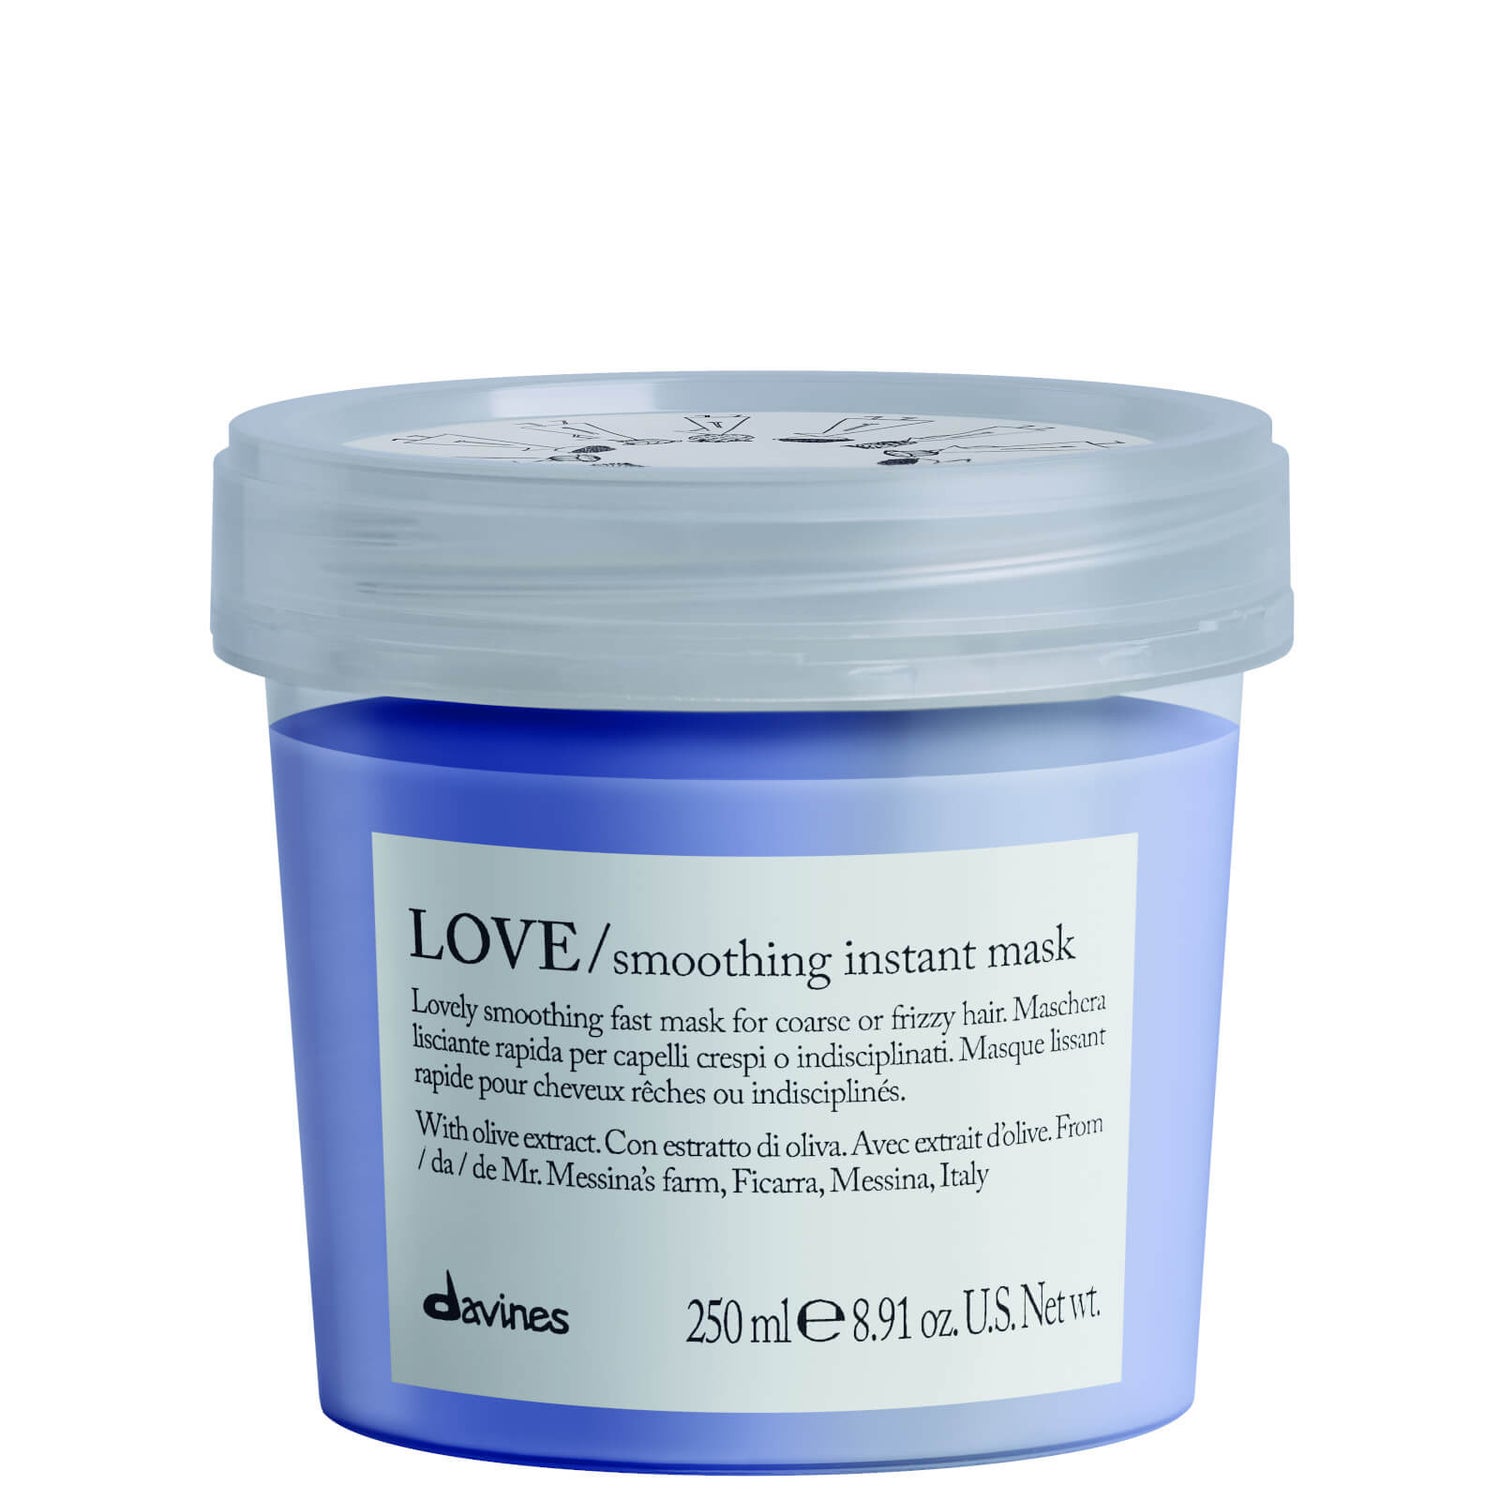 Davines Love/ Smoothing Instant Mask 250ml